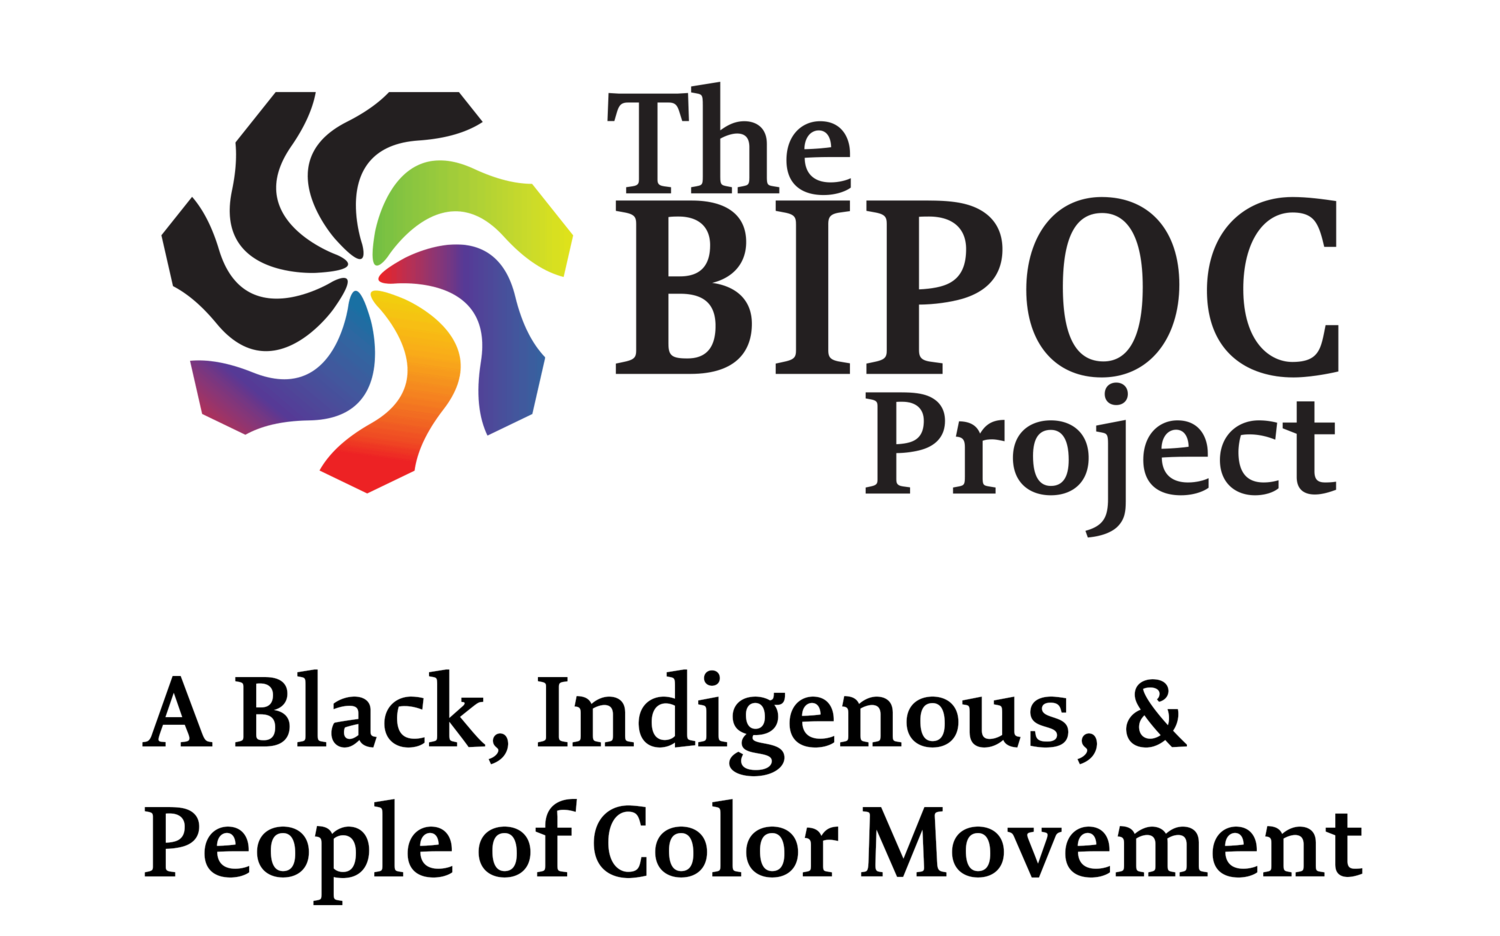 www.thebipocproject.org